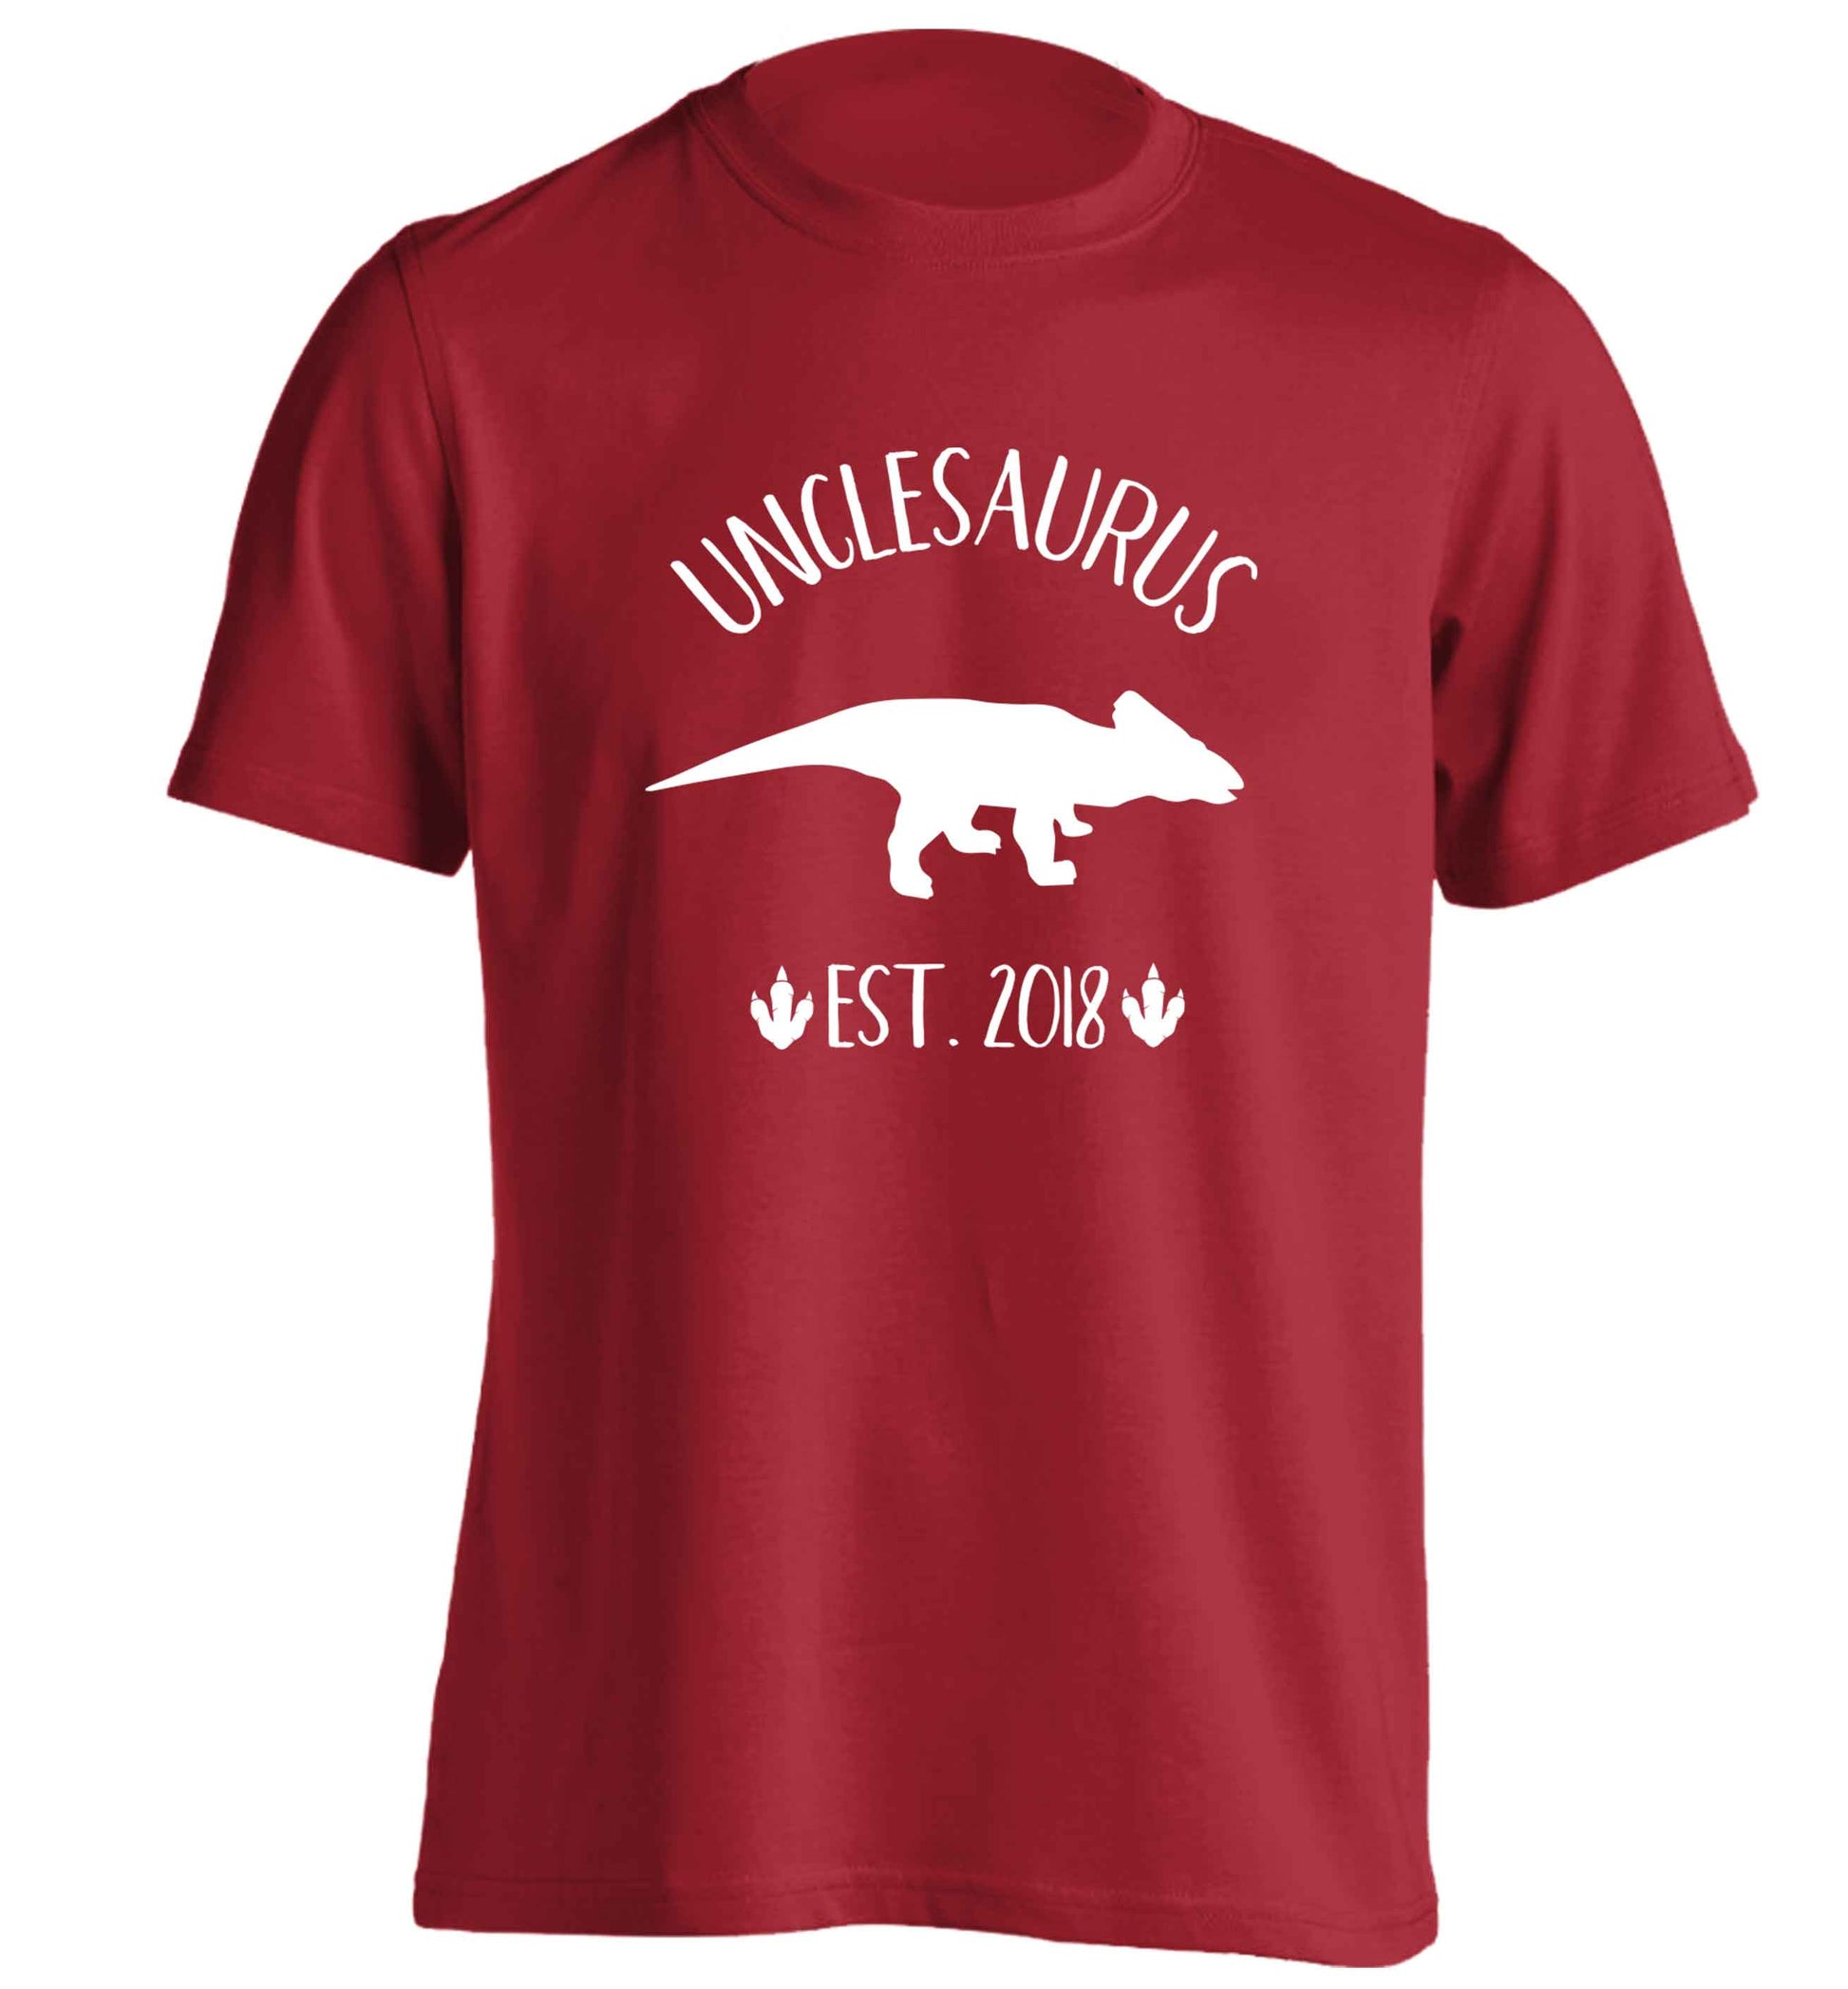 Personalised unclesaurus since (custom date) adults unisex red Tshirt 2XL